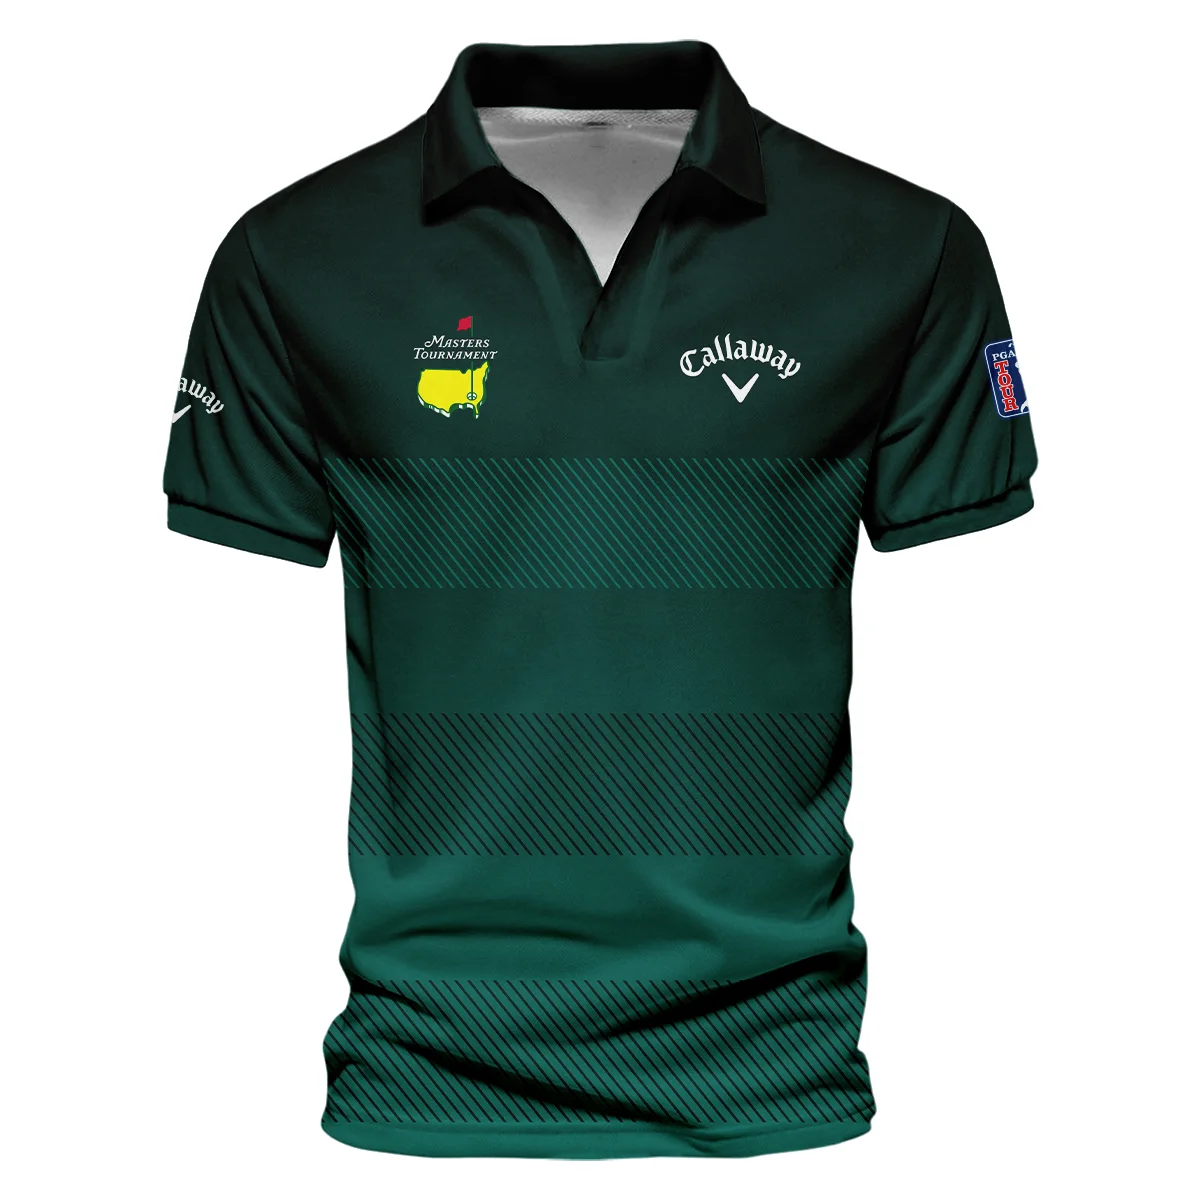 Callaway Masters Tournament Dark Green Gradient Stripes Pattern Golf Sport Vneck Polo Shirt Style Classic Polo Shirt For Men